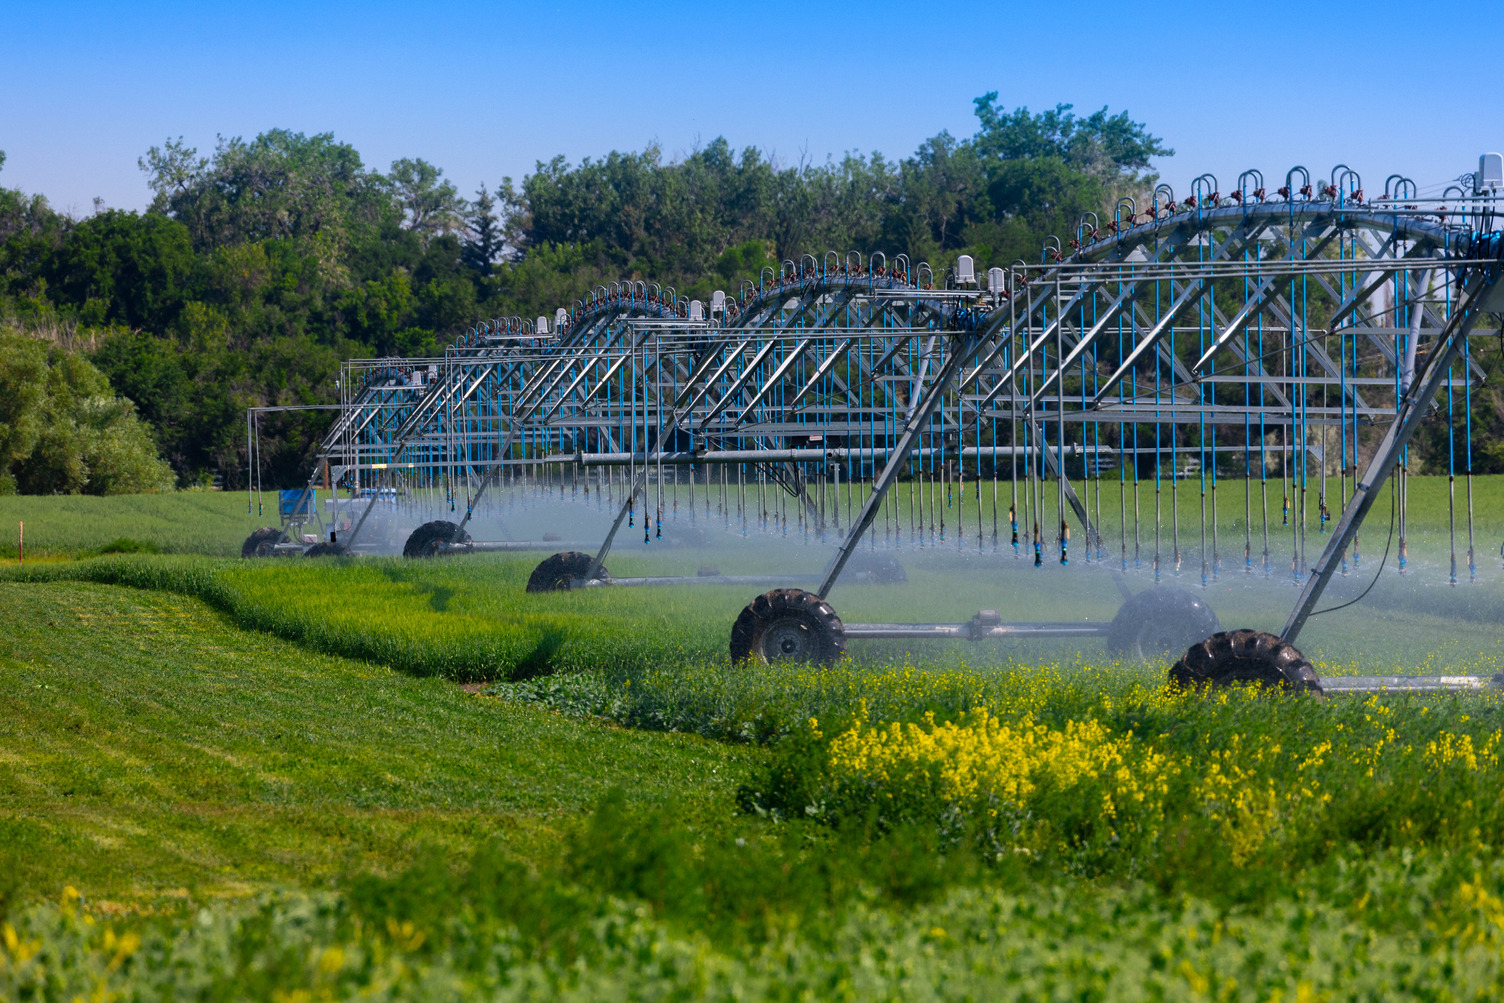 Irrigation pivots spray water on a crop at a research farm.